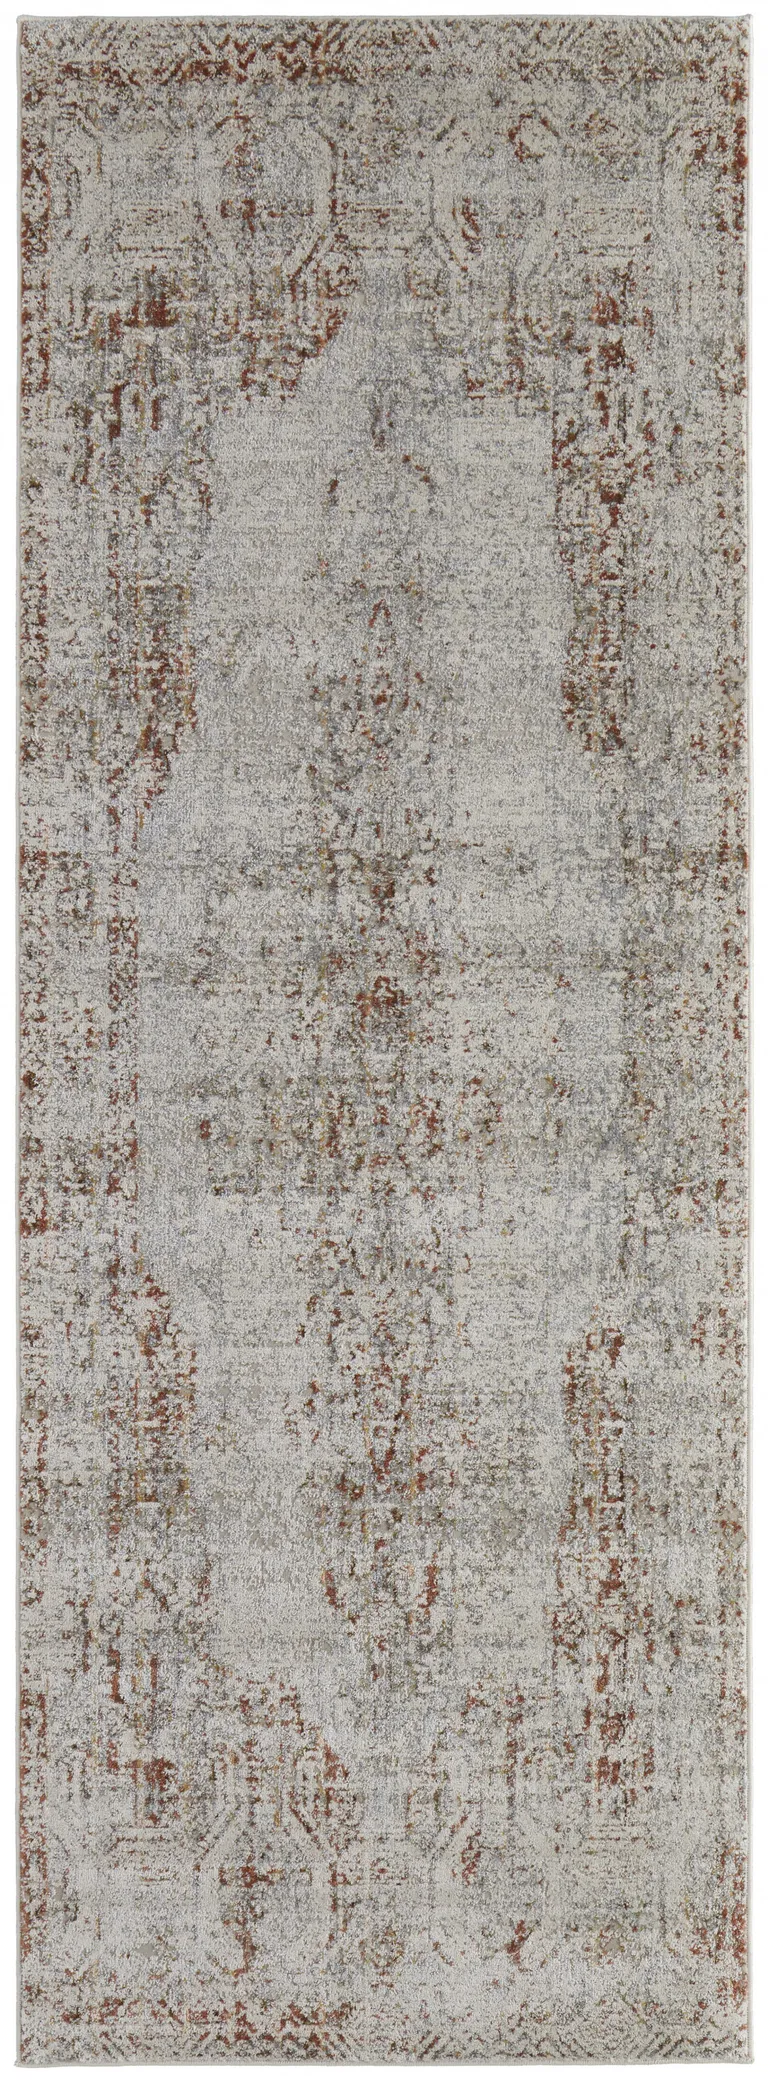 10' Tan Ivory And Orange Floral Power Loom Distressed Runner Rug With Fringe Photo 1